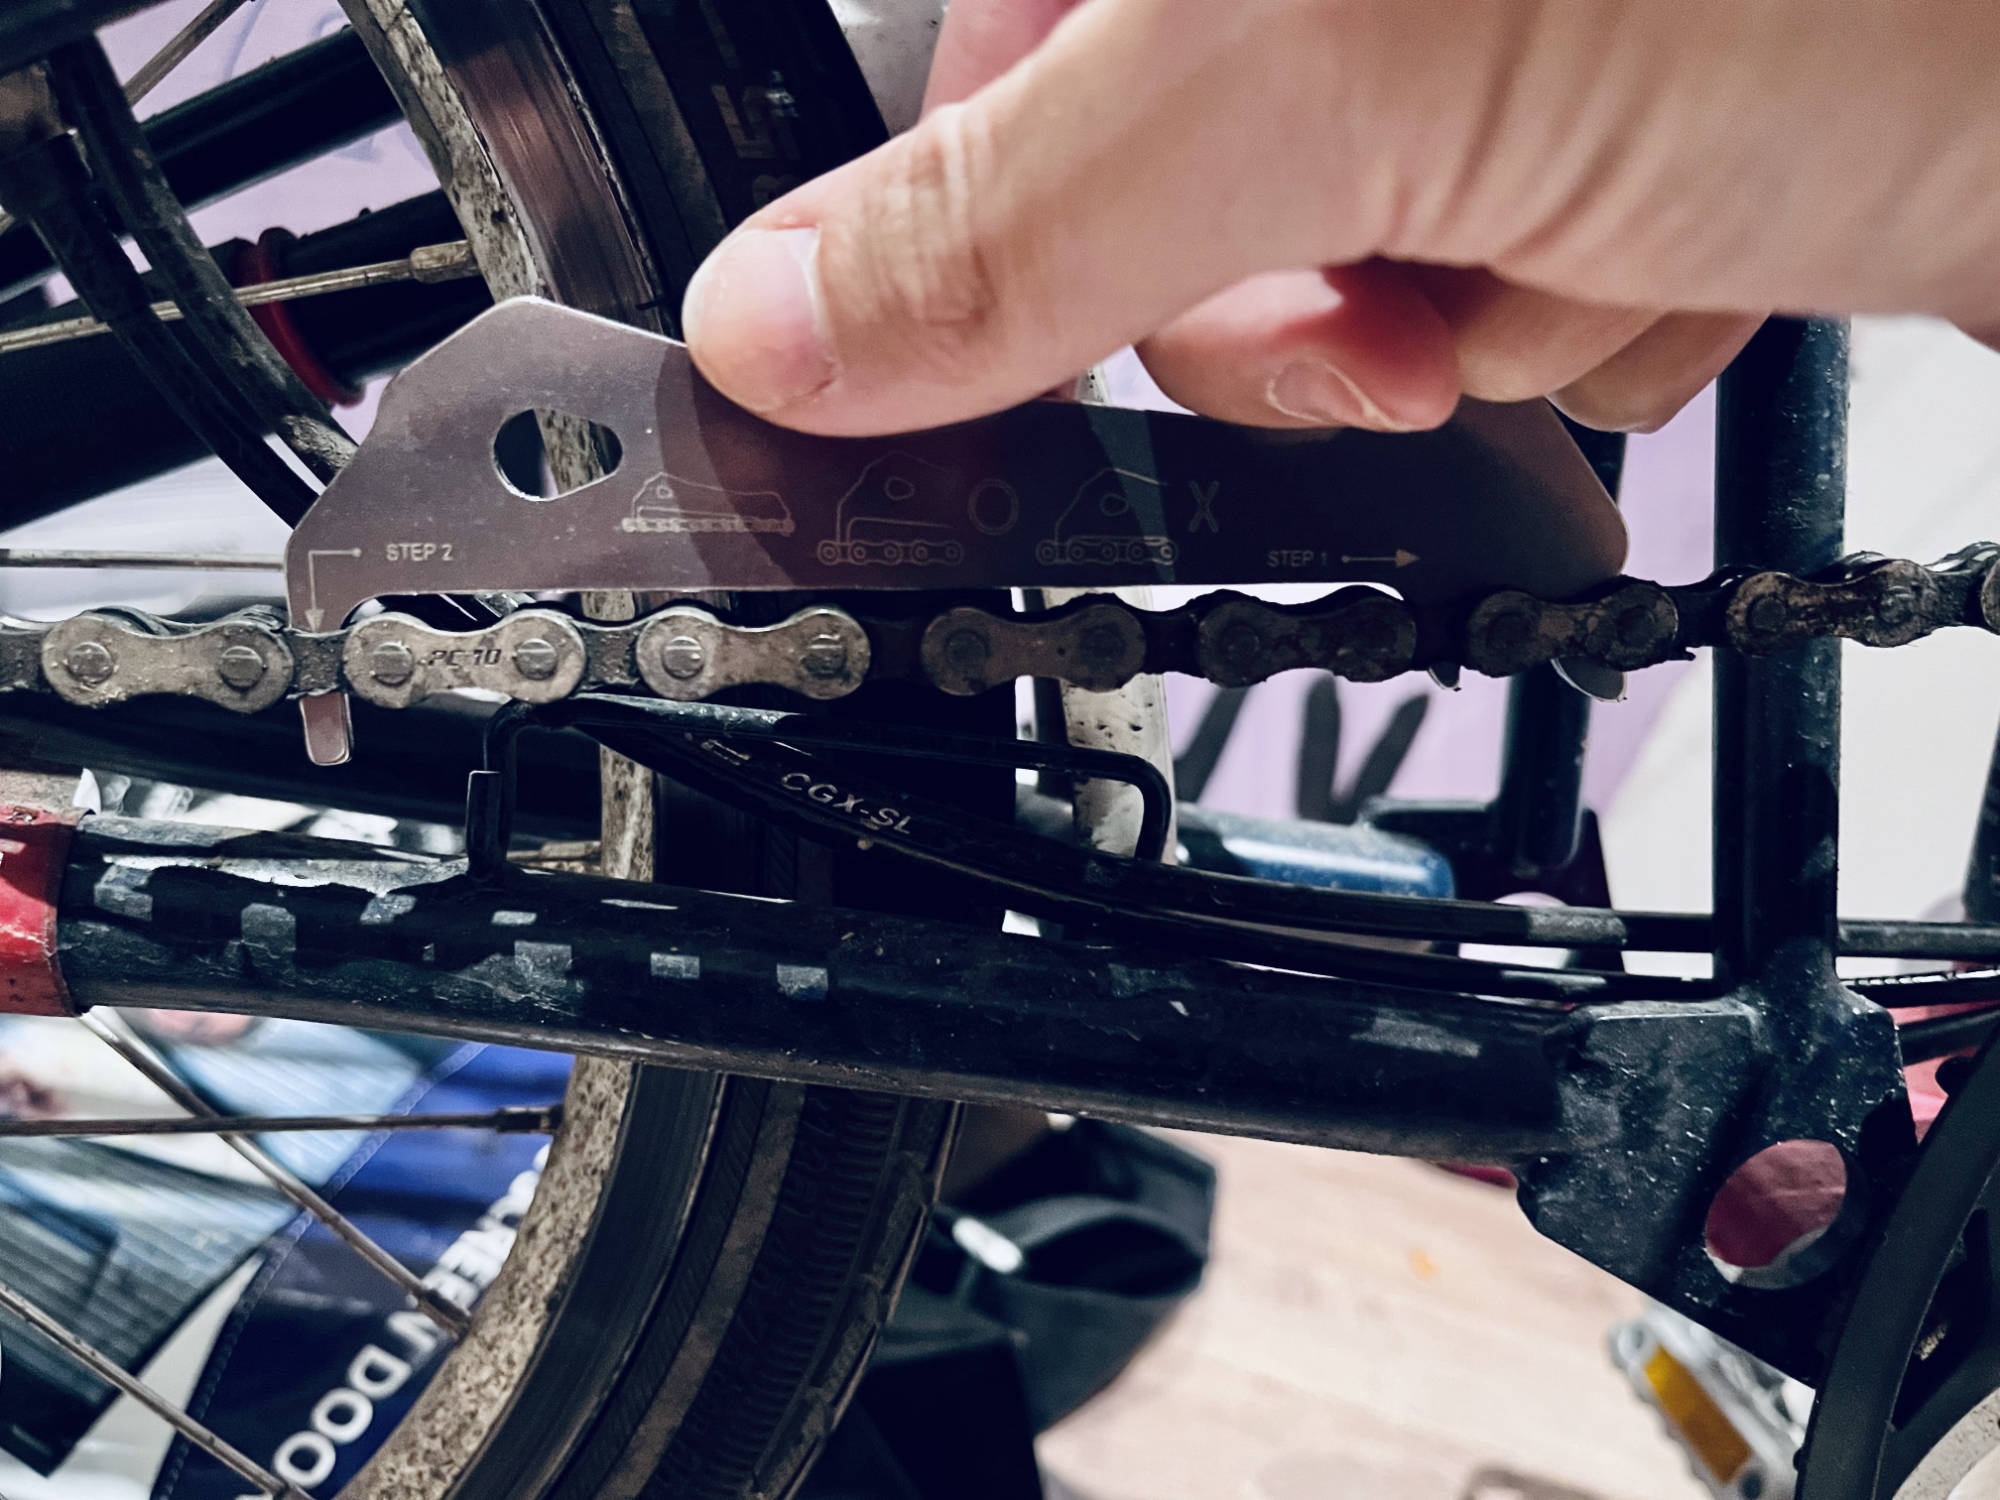 Bike chain measuring tool indicating the chain is worn out